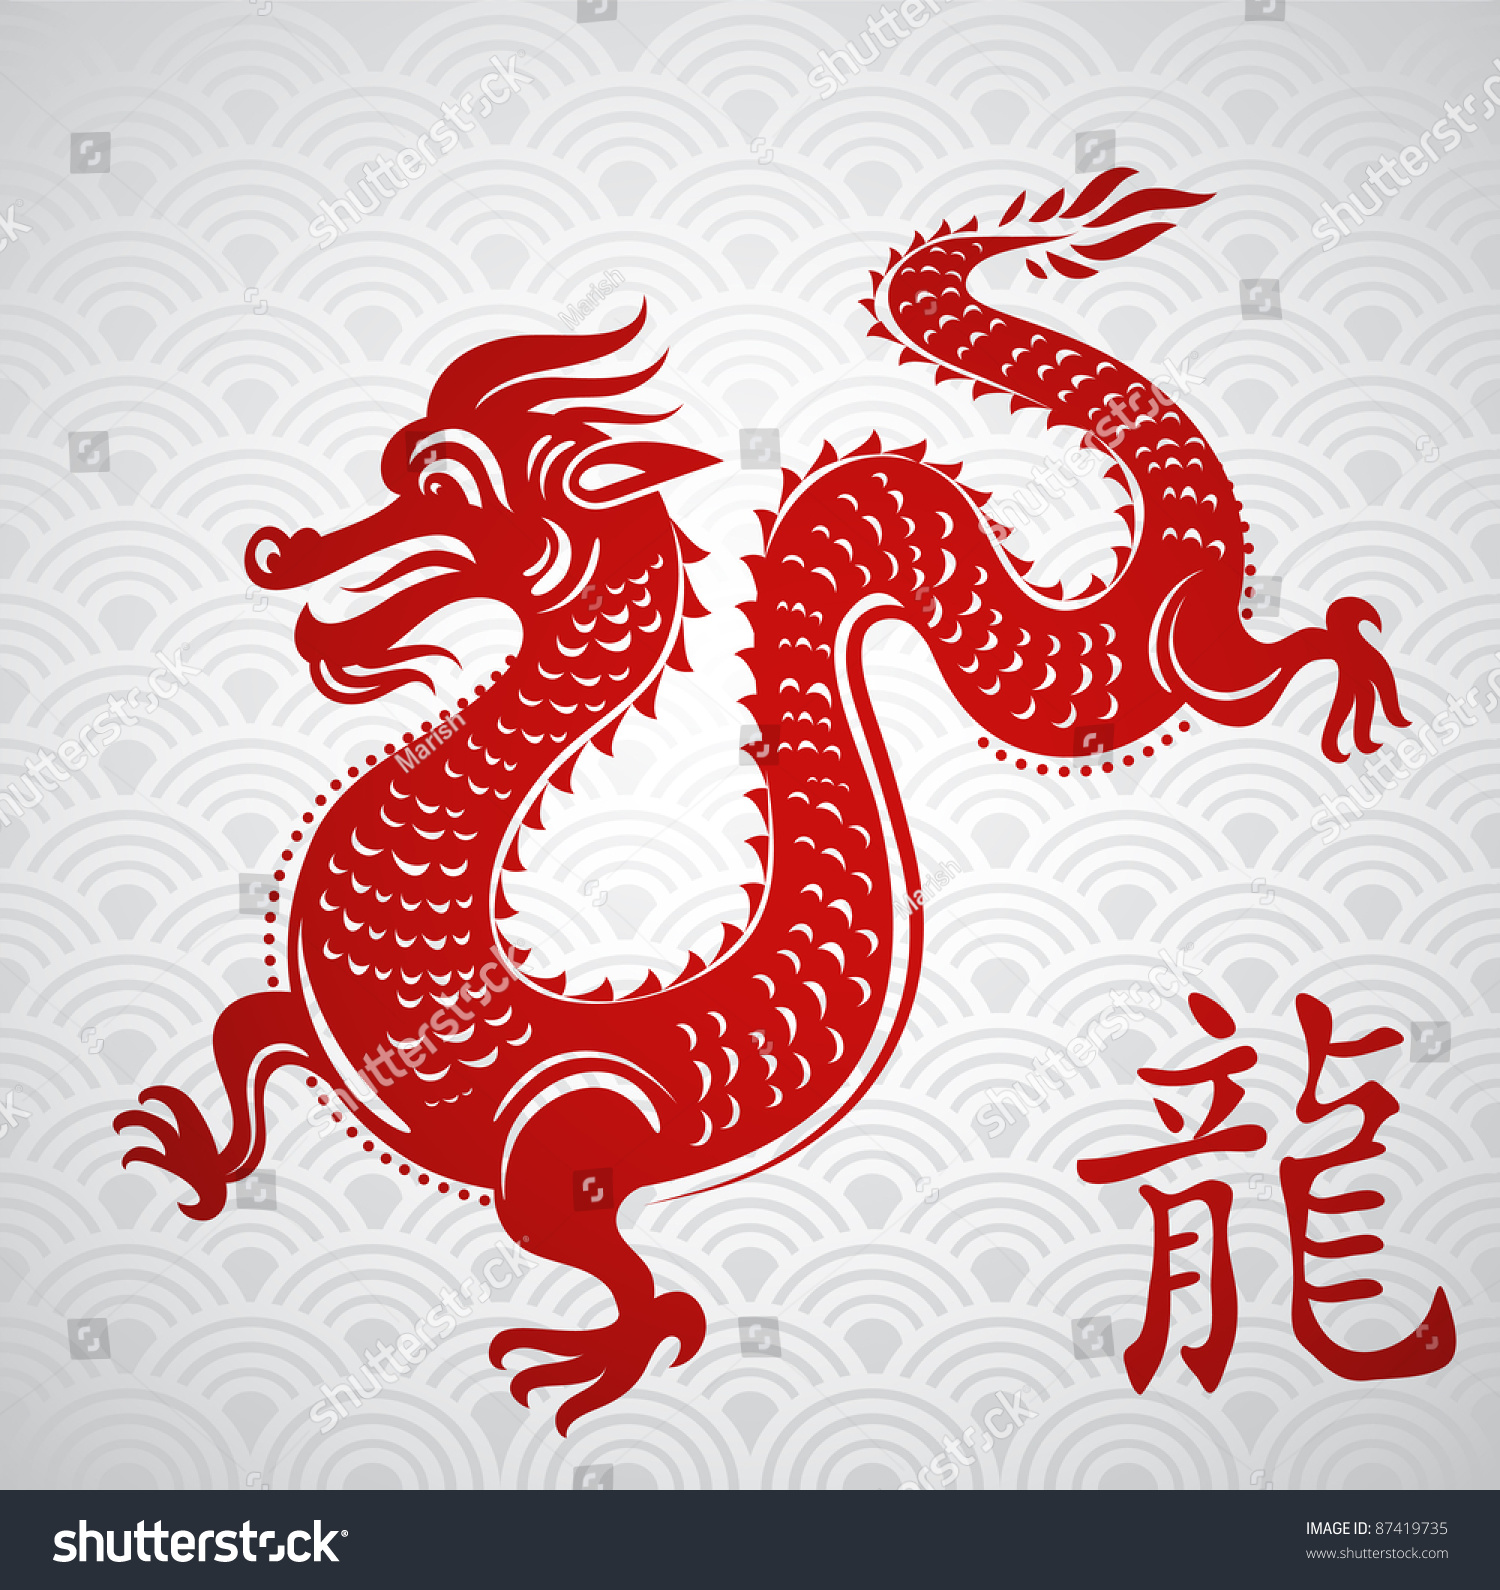 Year Of Dragon, Chinese New Year Stock Vector Illustration 87419735 